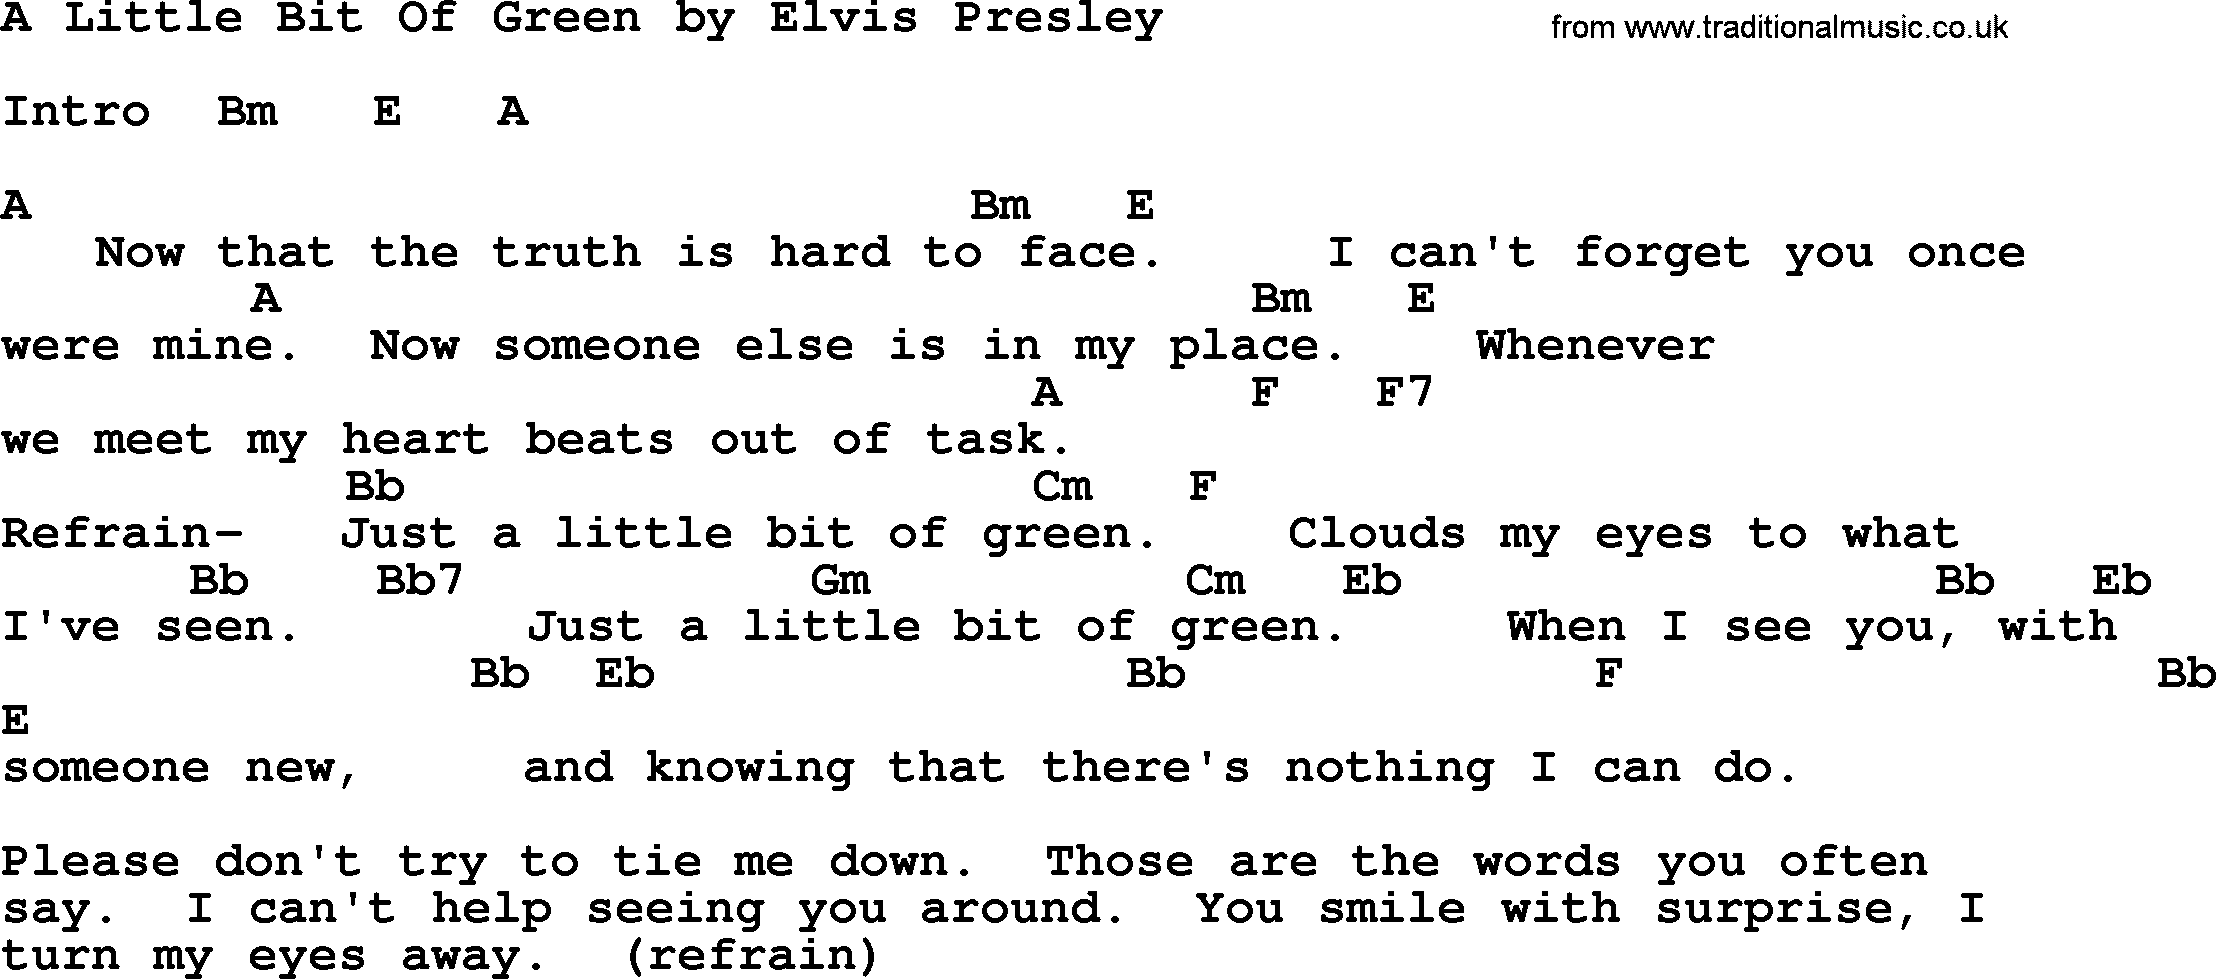 Elvis Presley song: A Little Bit Of Green, lyrics and chords